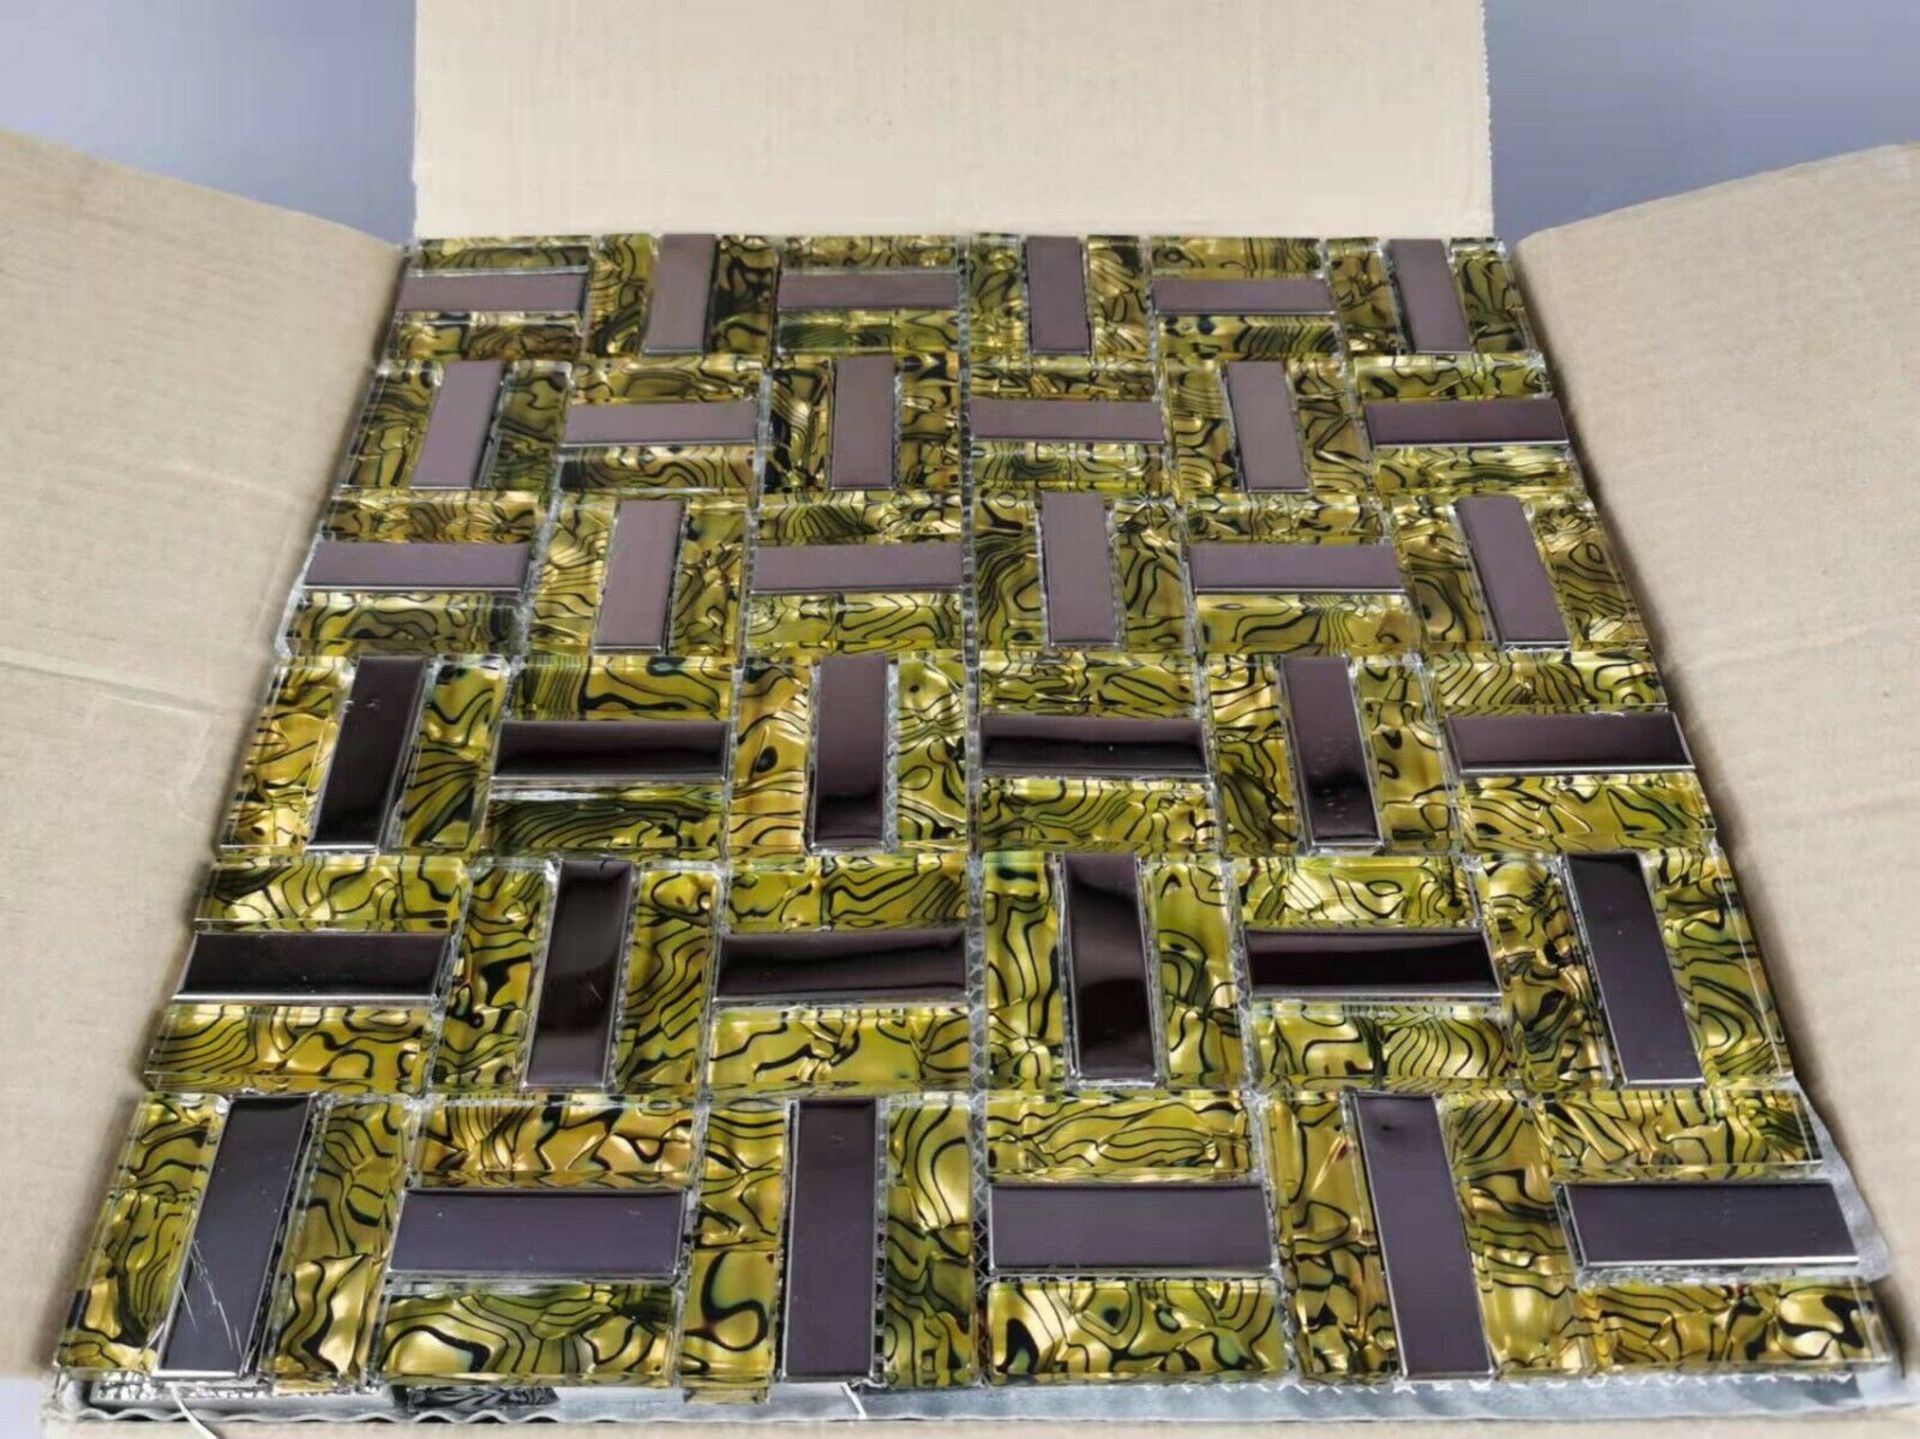 Stock Clearance High Quality Glass/Stainless Steel Mosaic Tiles - 11 Sheets - One Square Metre - Image 2 of 3